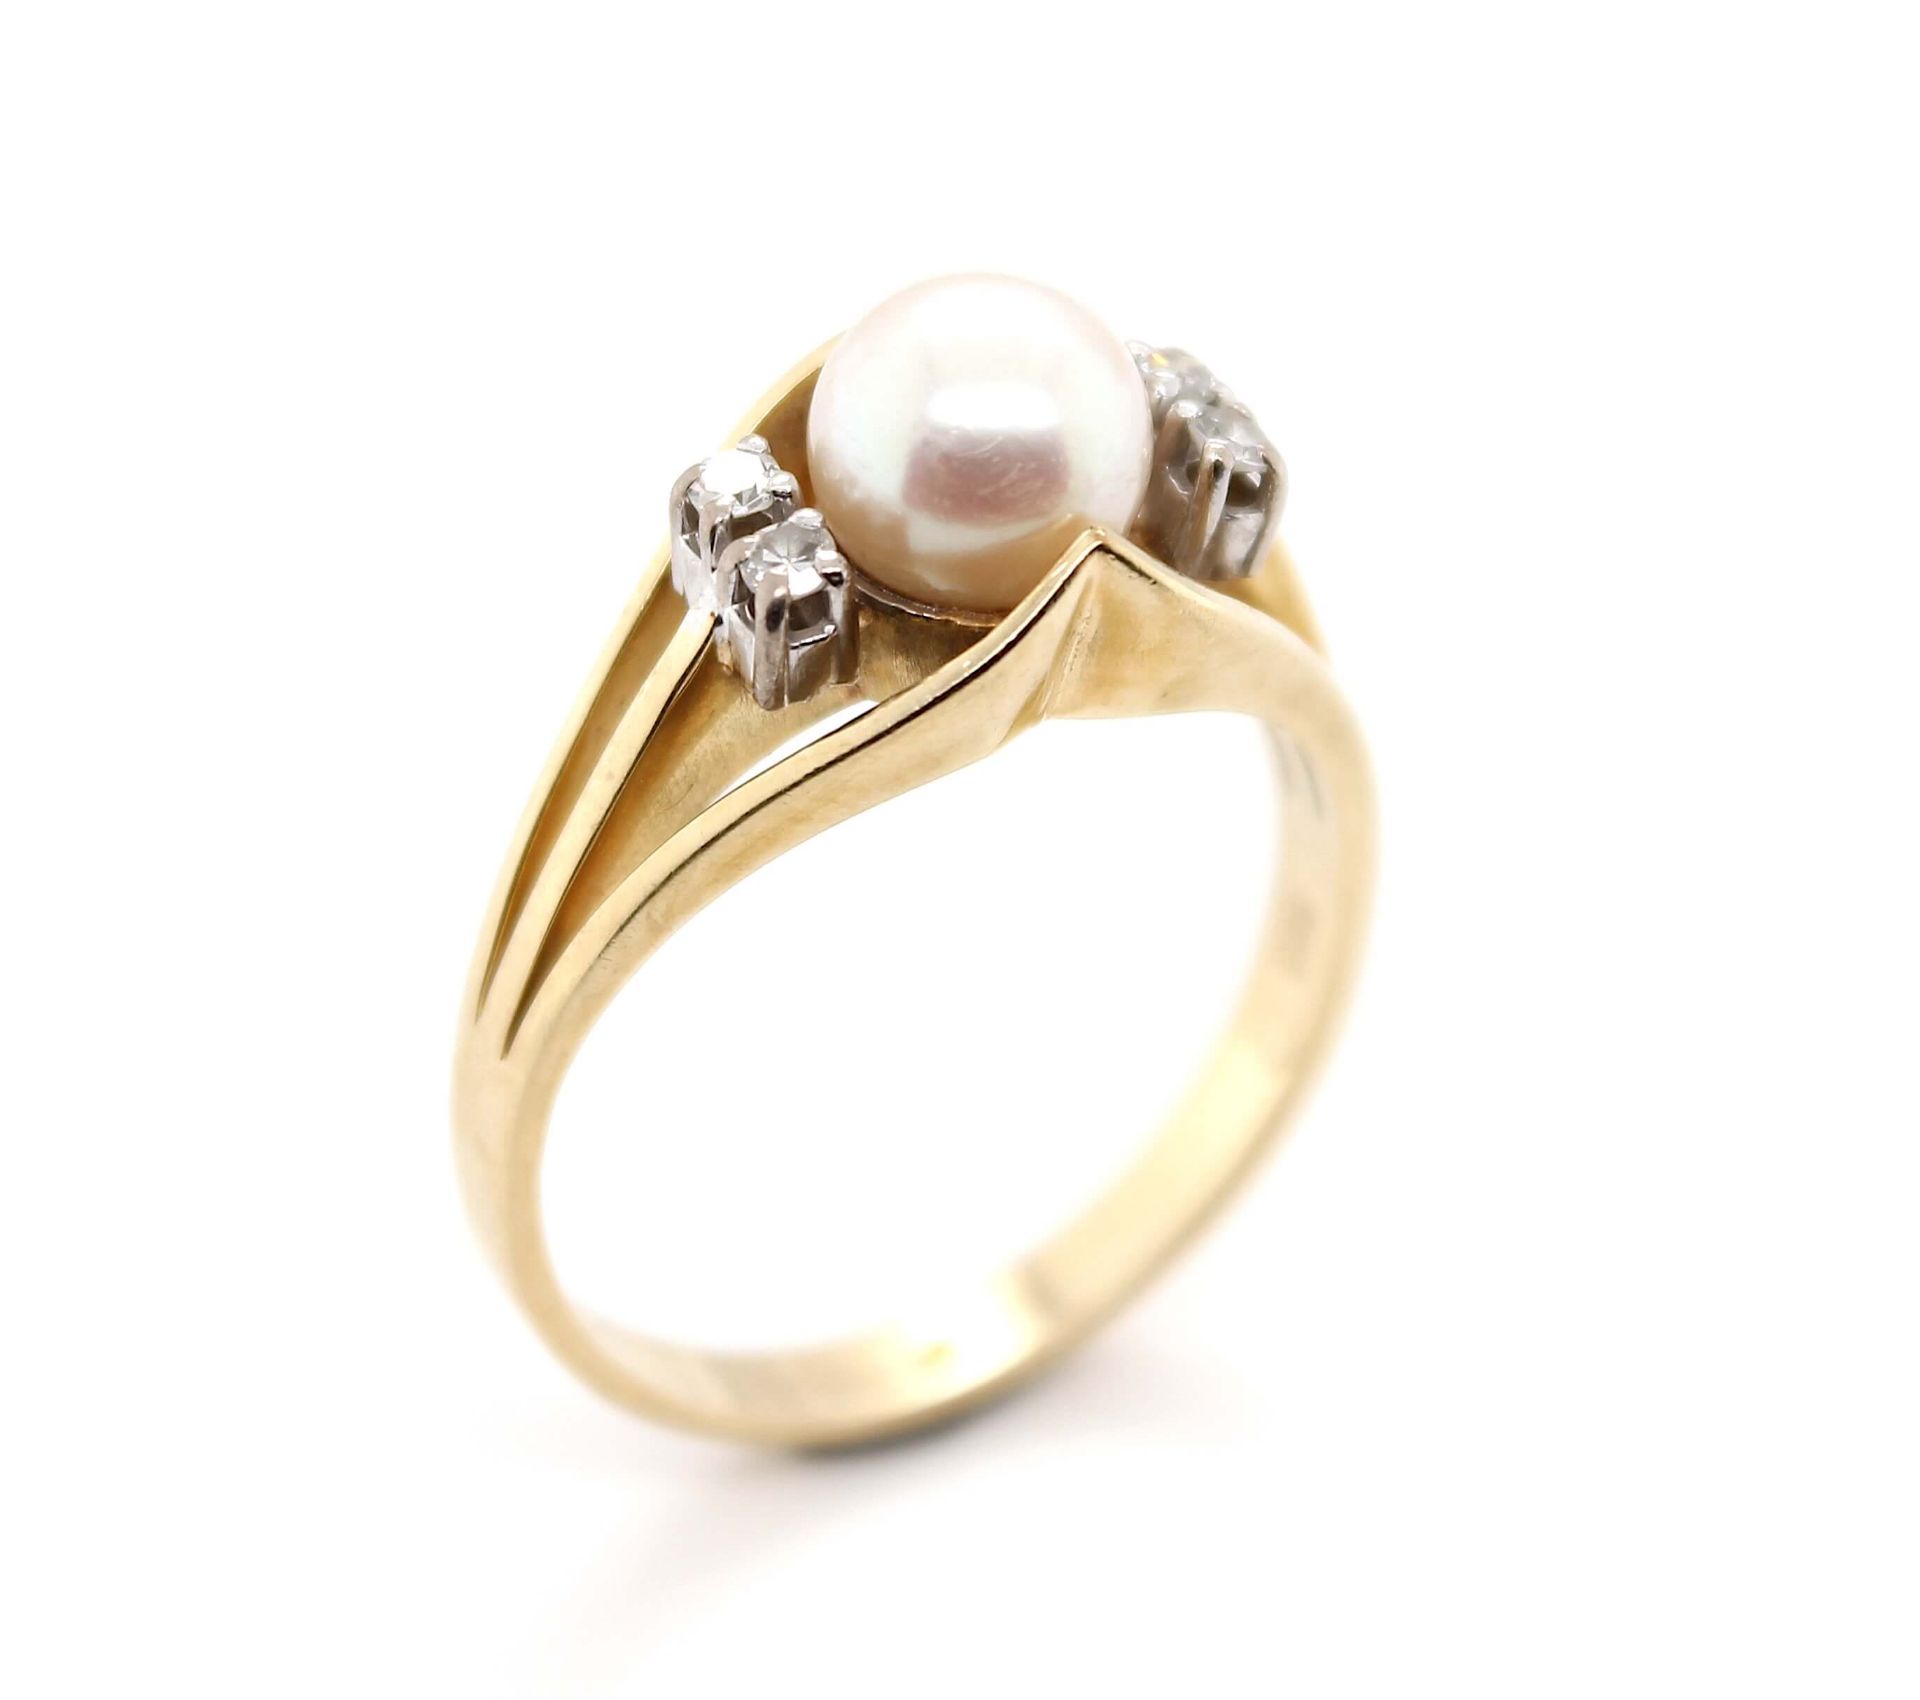 Ring with a cultured pearl and diamonds